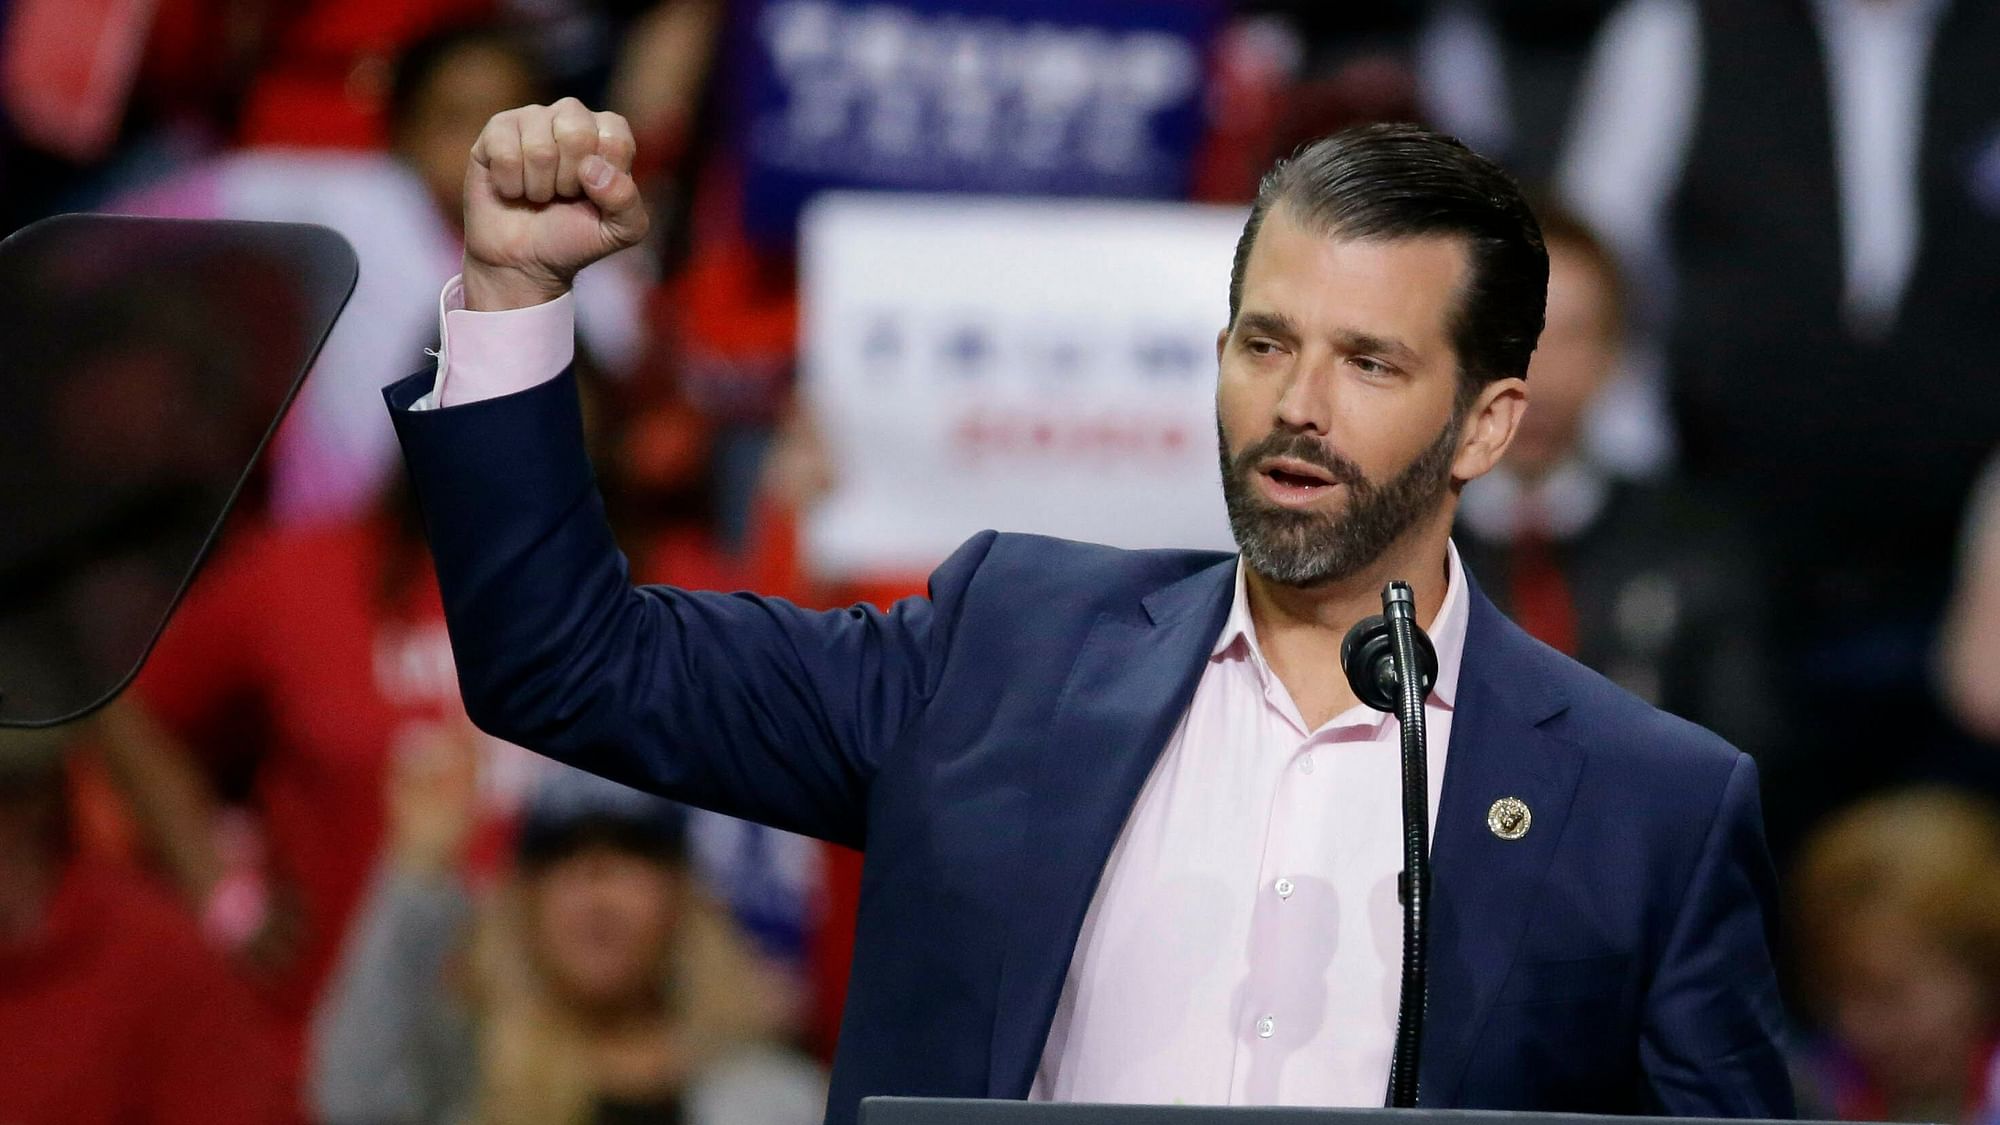 Donald Trump Jr speaks ahead of his father President Donald Trump at a Make America Great Again rally Saturday, 27 April 2019, in Green Bay, Wis.&nbsp;